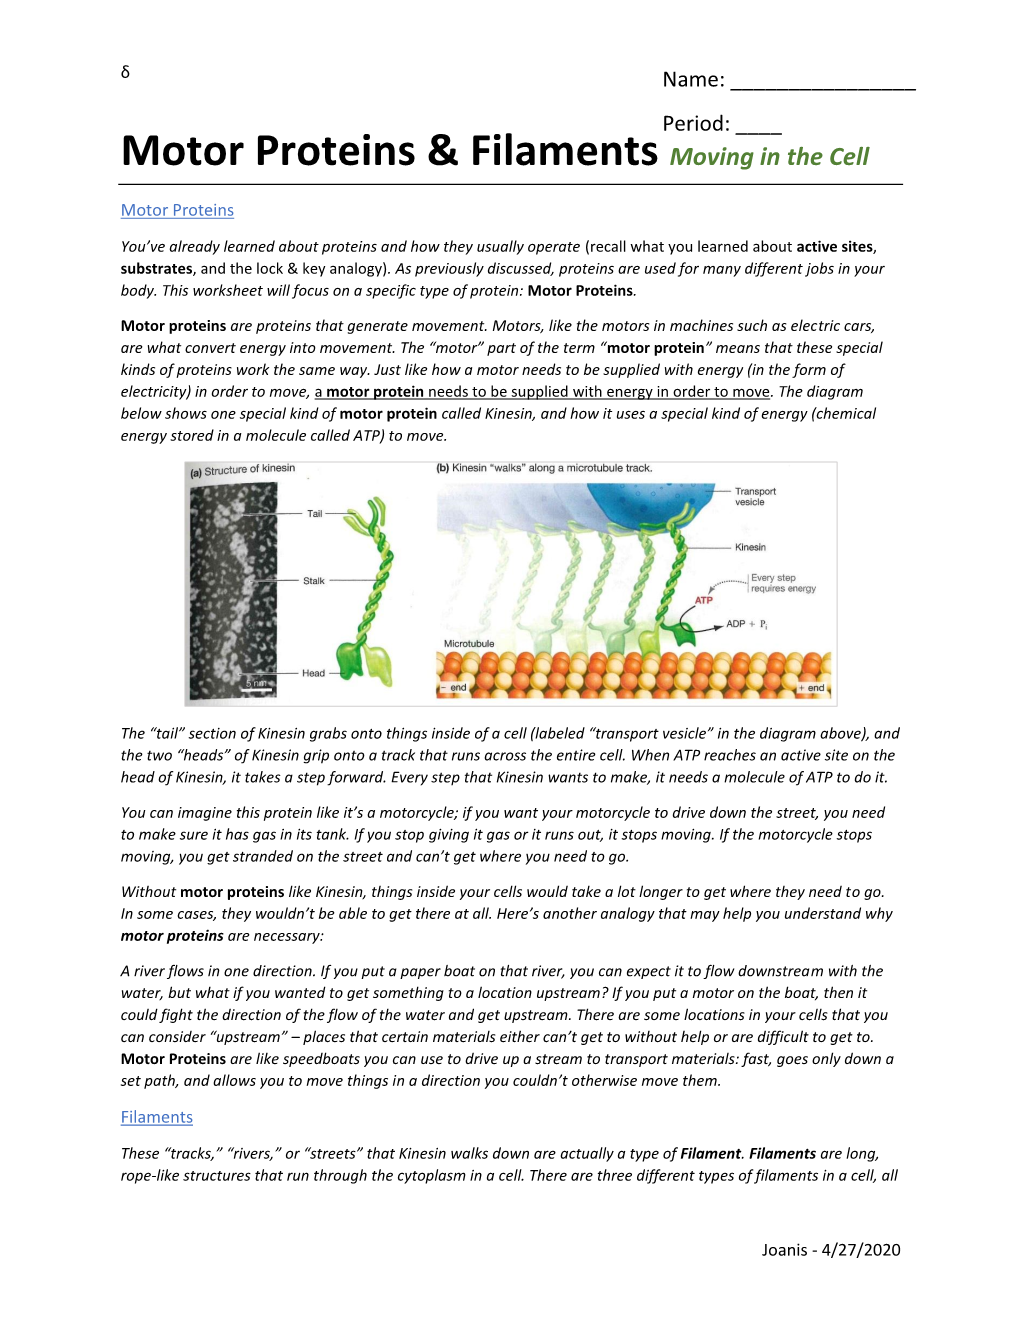 Motor Proteins & Filaments Moving in the Cell